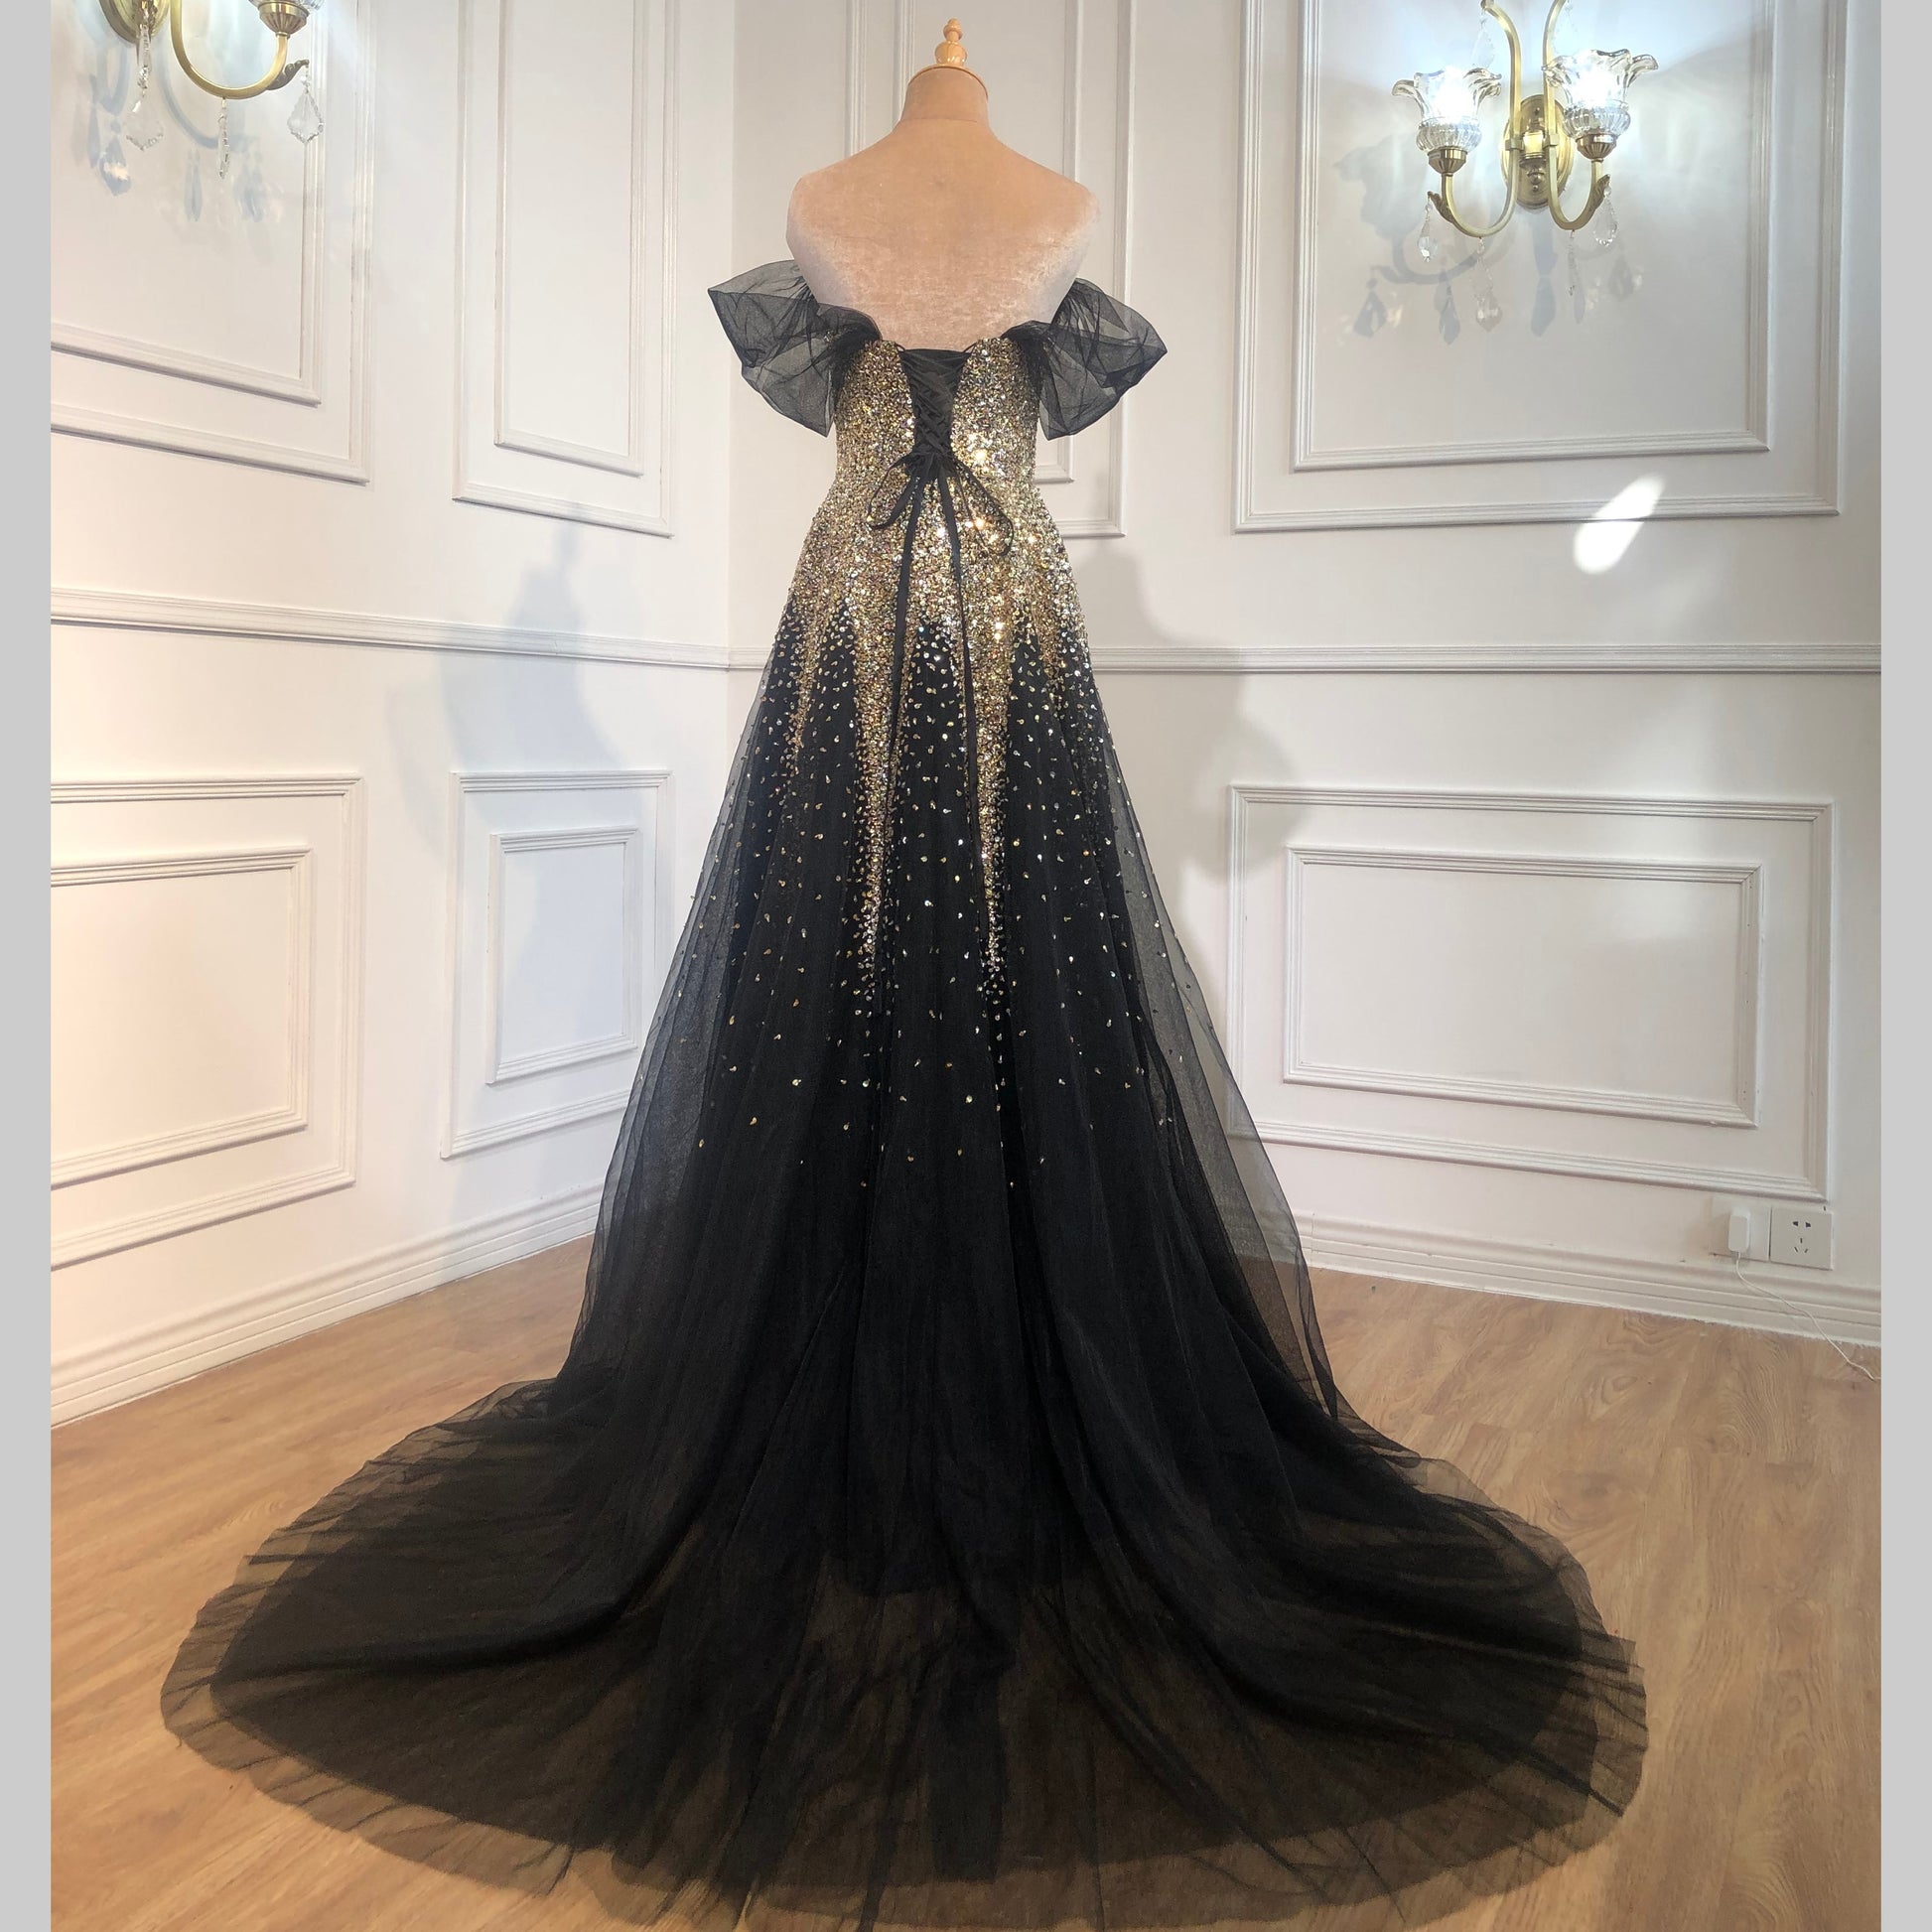 Black Gold A-line Luxury Evening Dresses Gowns 2021 Sparkle Beading Sexy For Women Party Dress - LiveTrendsX